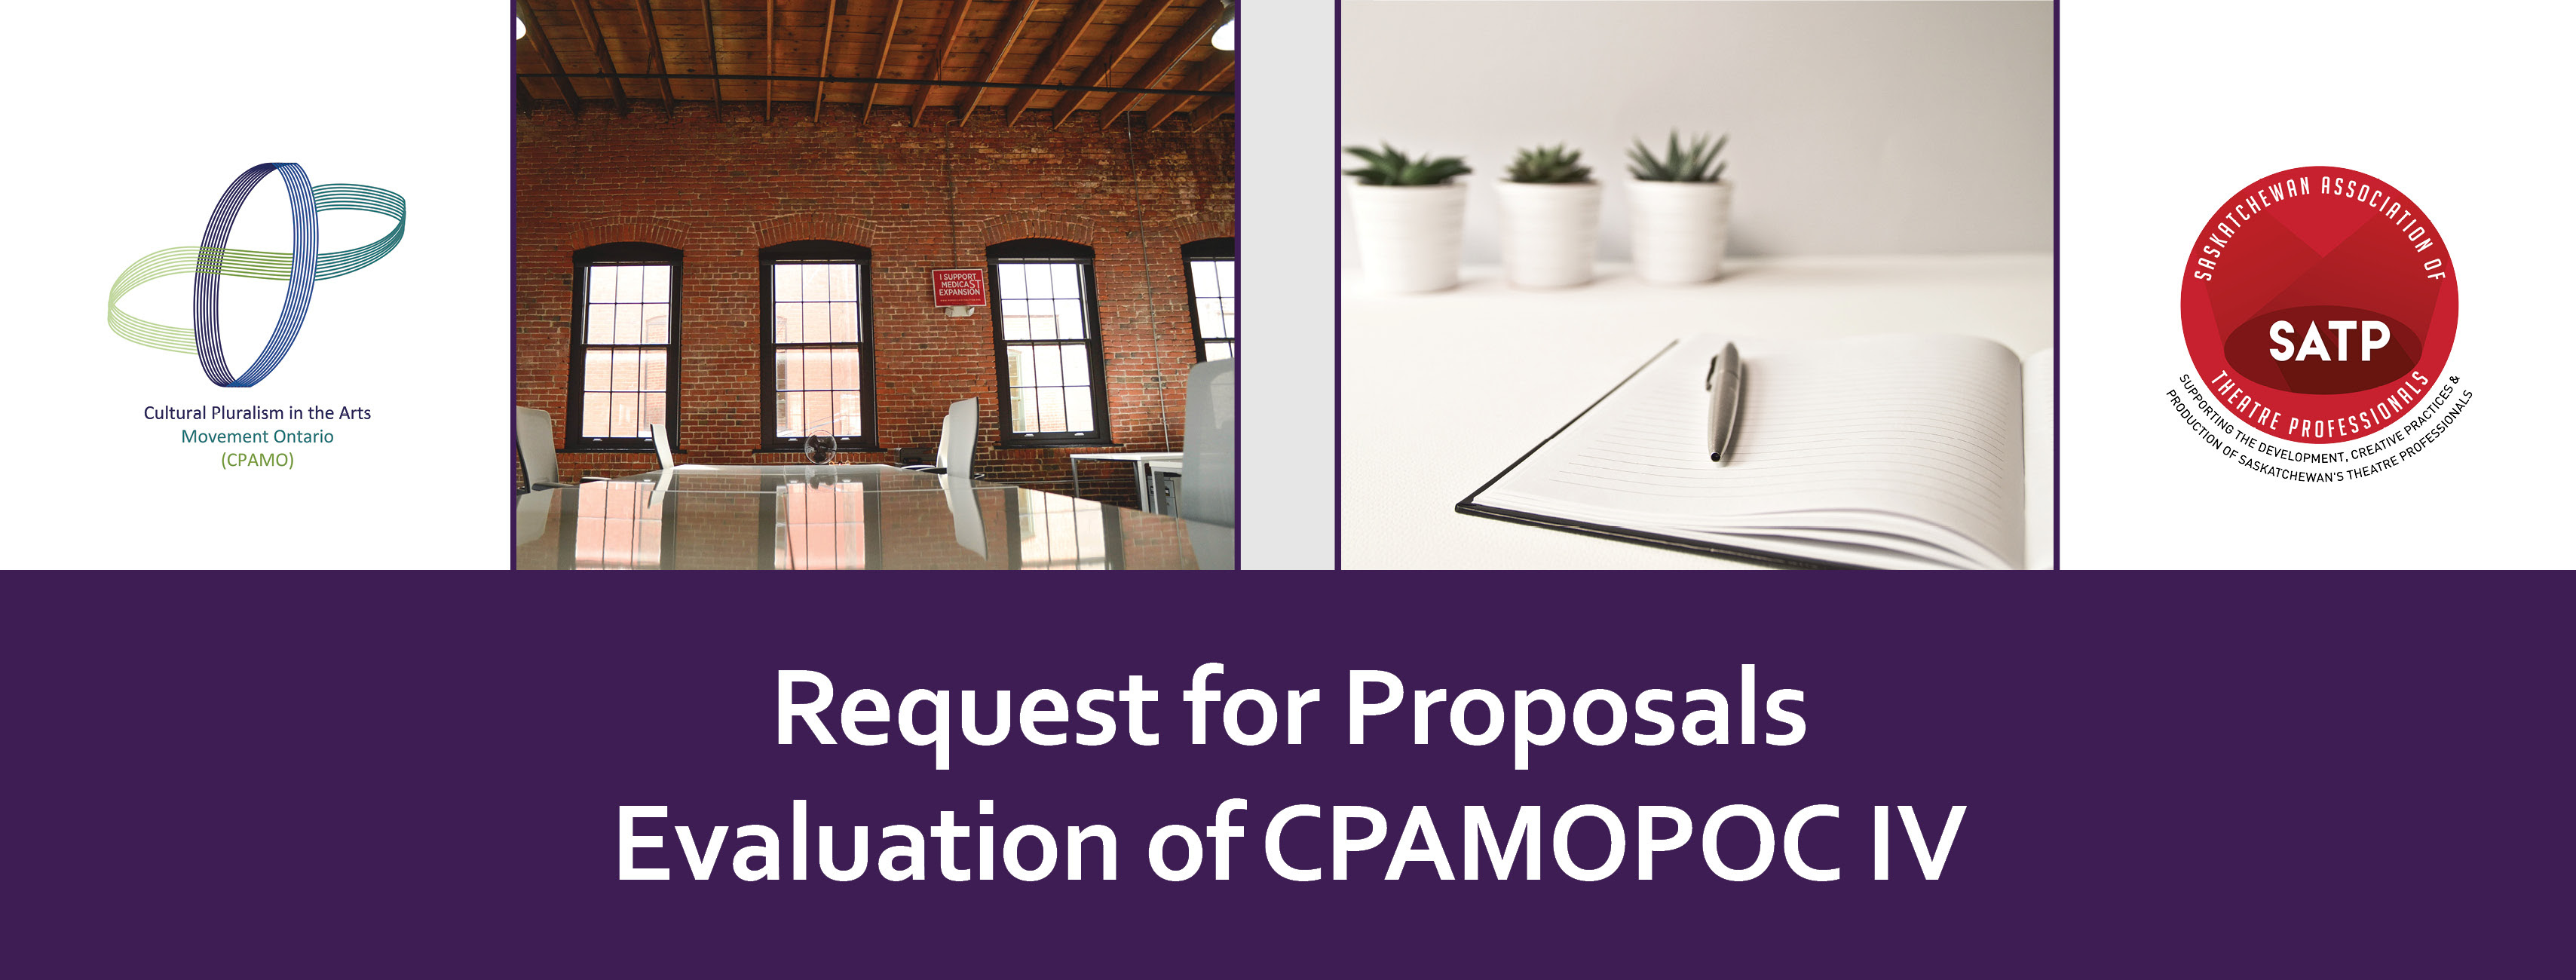 Request for Proposals Evaluation of CPAMOPOC IV